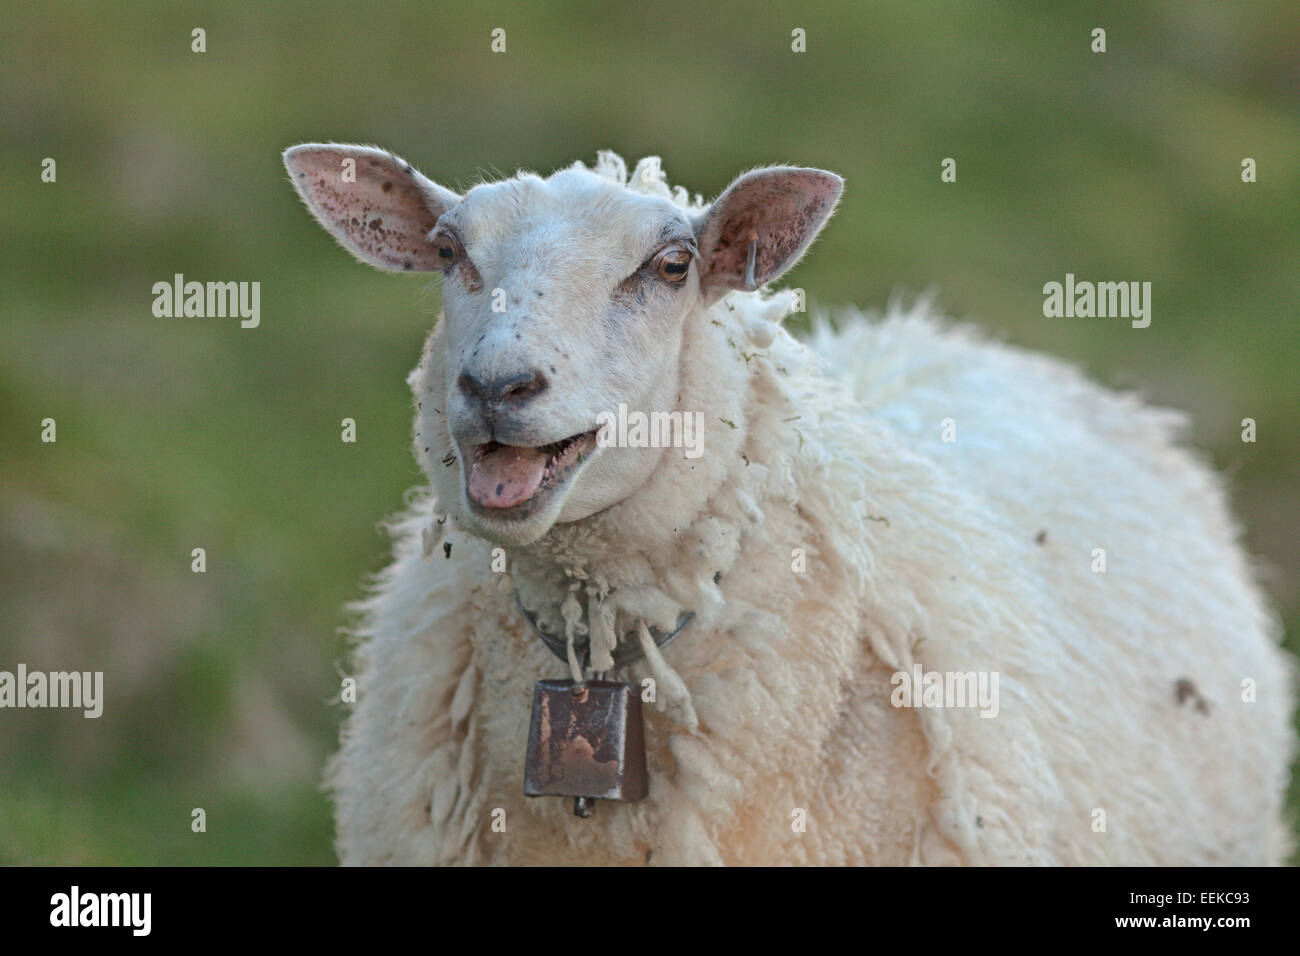 Grazing sheep with lambs at the Atlantic coast, Norway Stock Photo